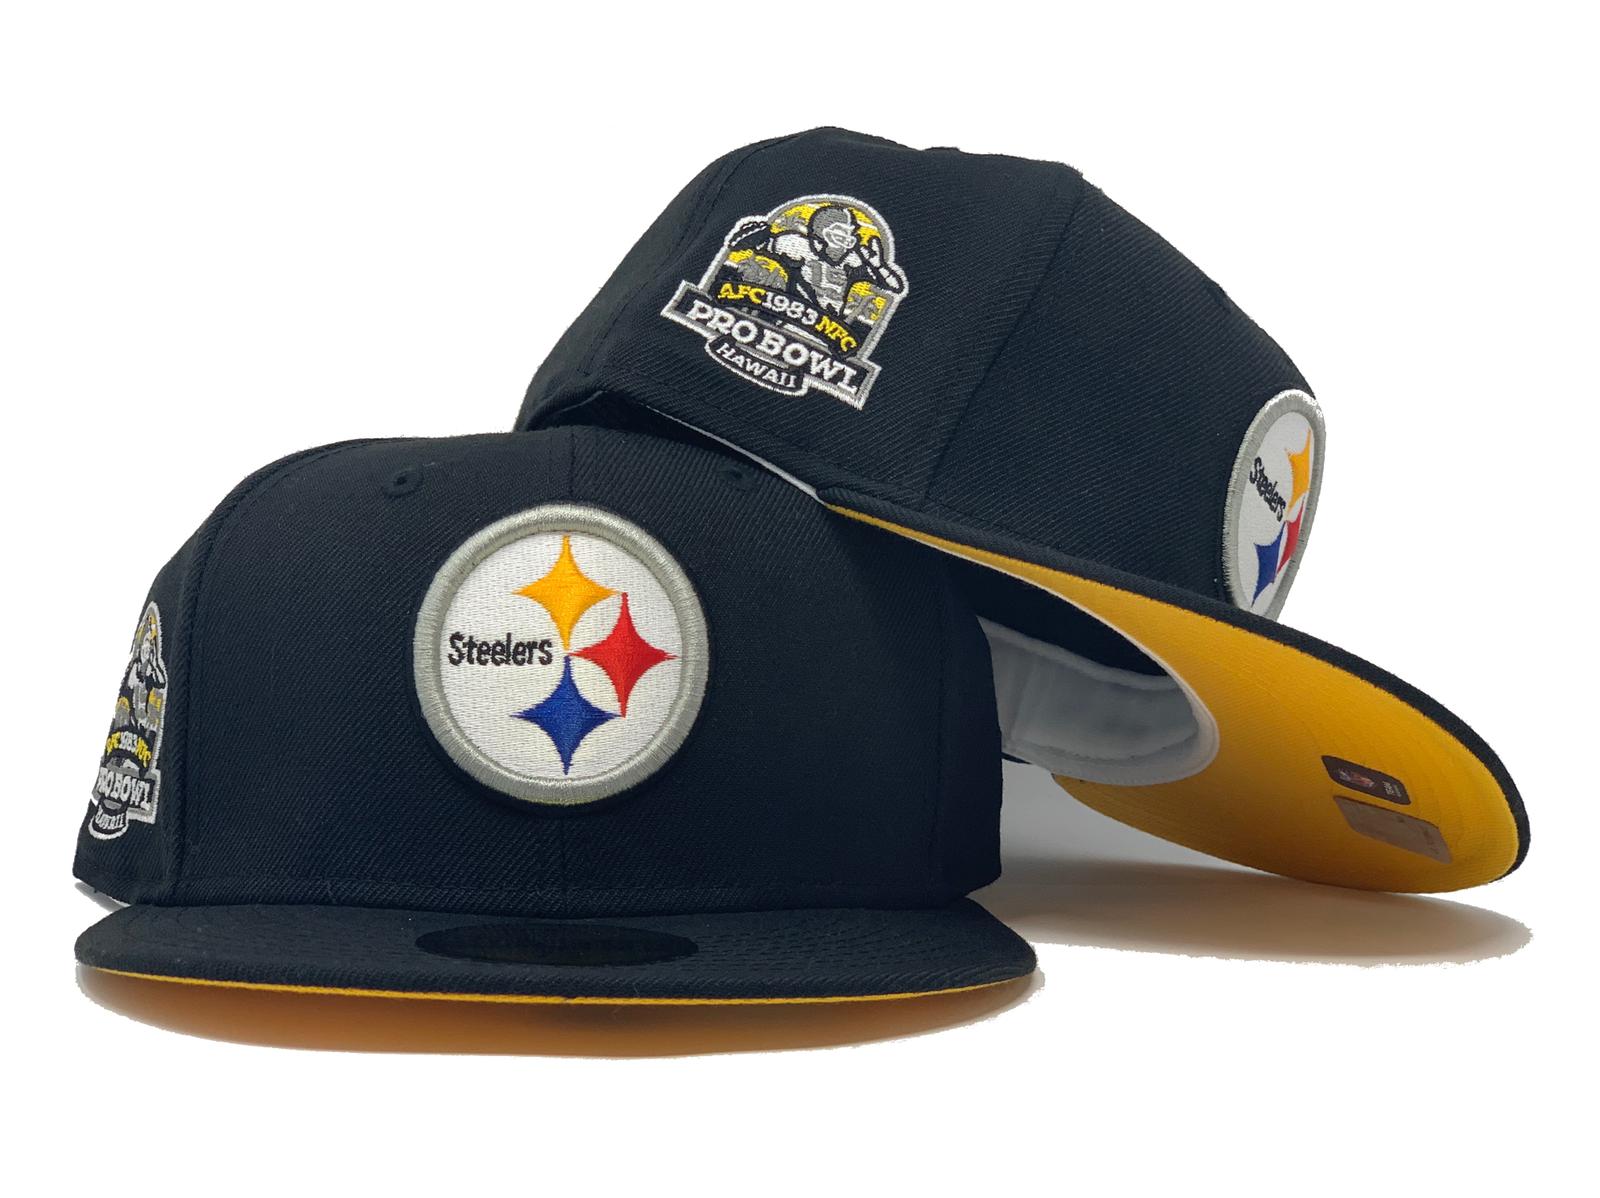 steelers fitted